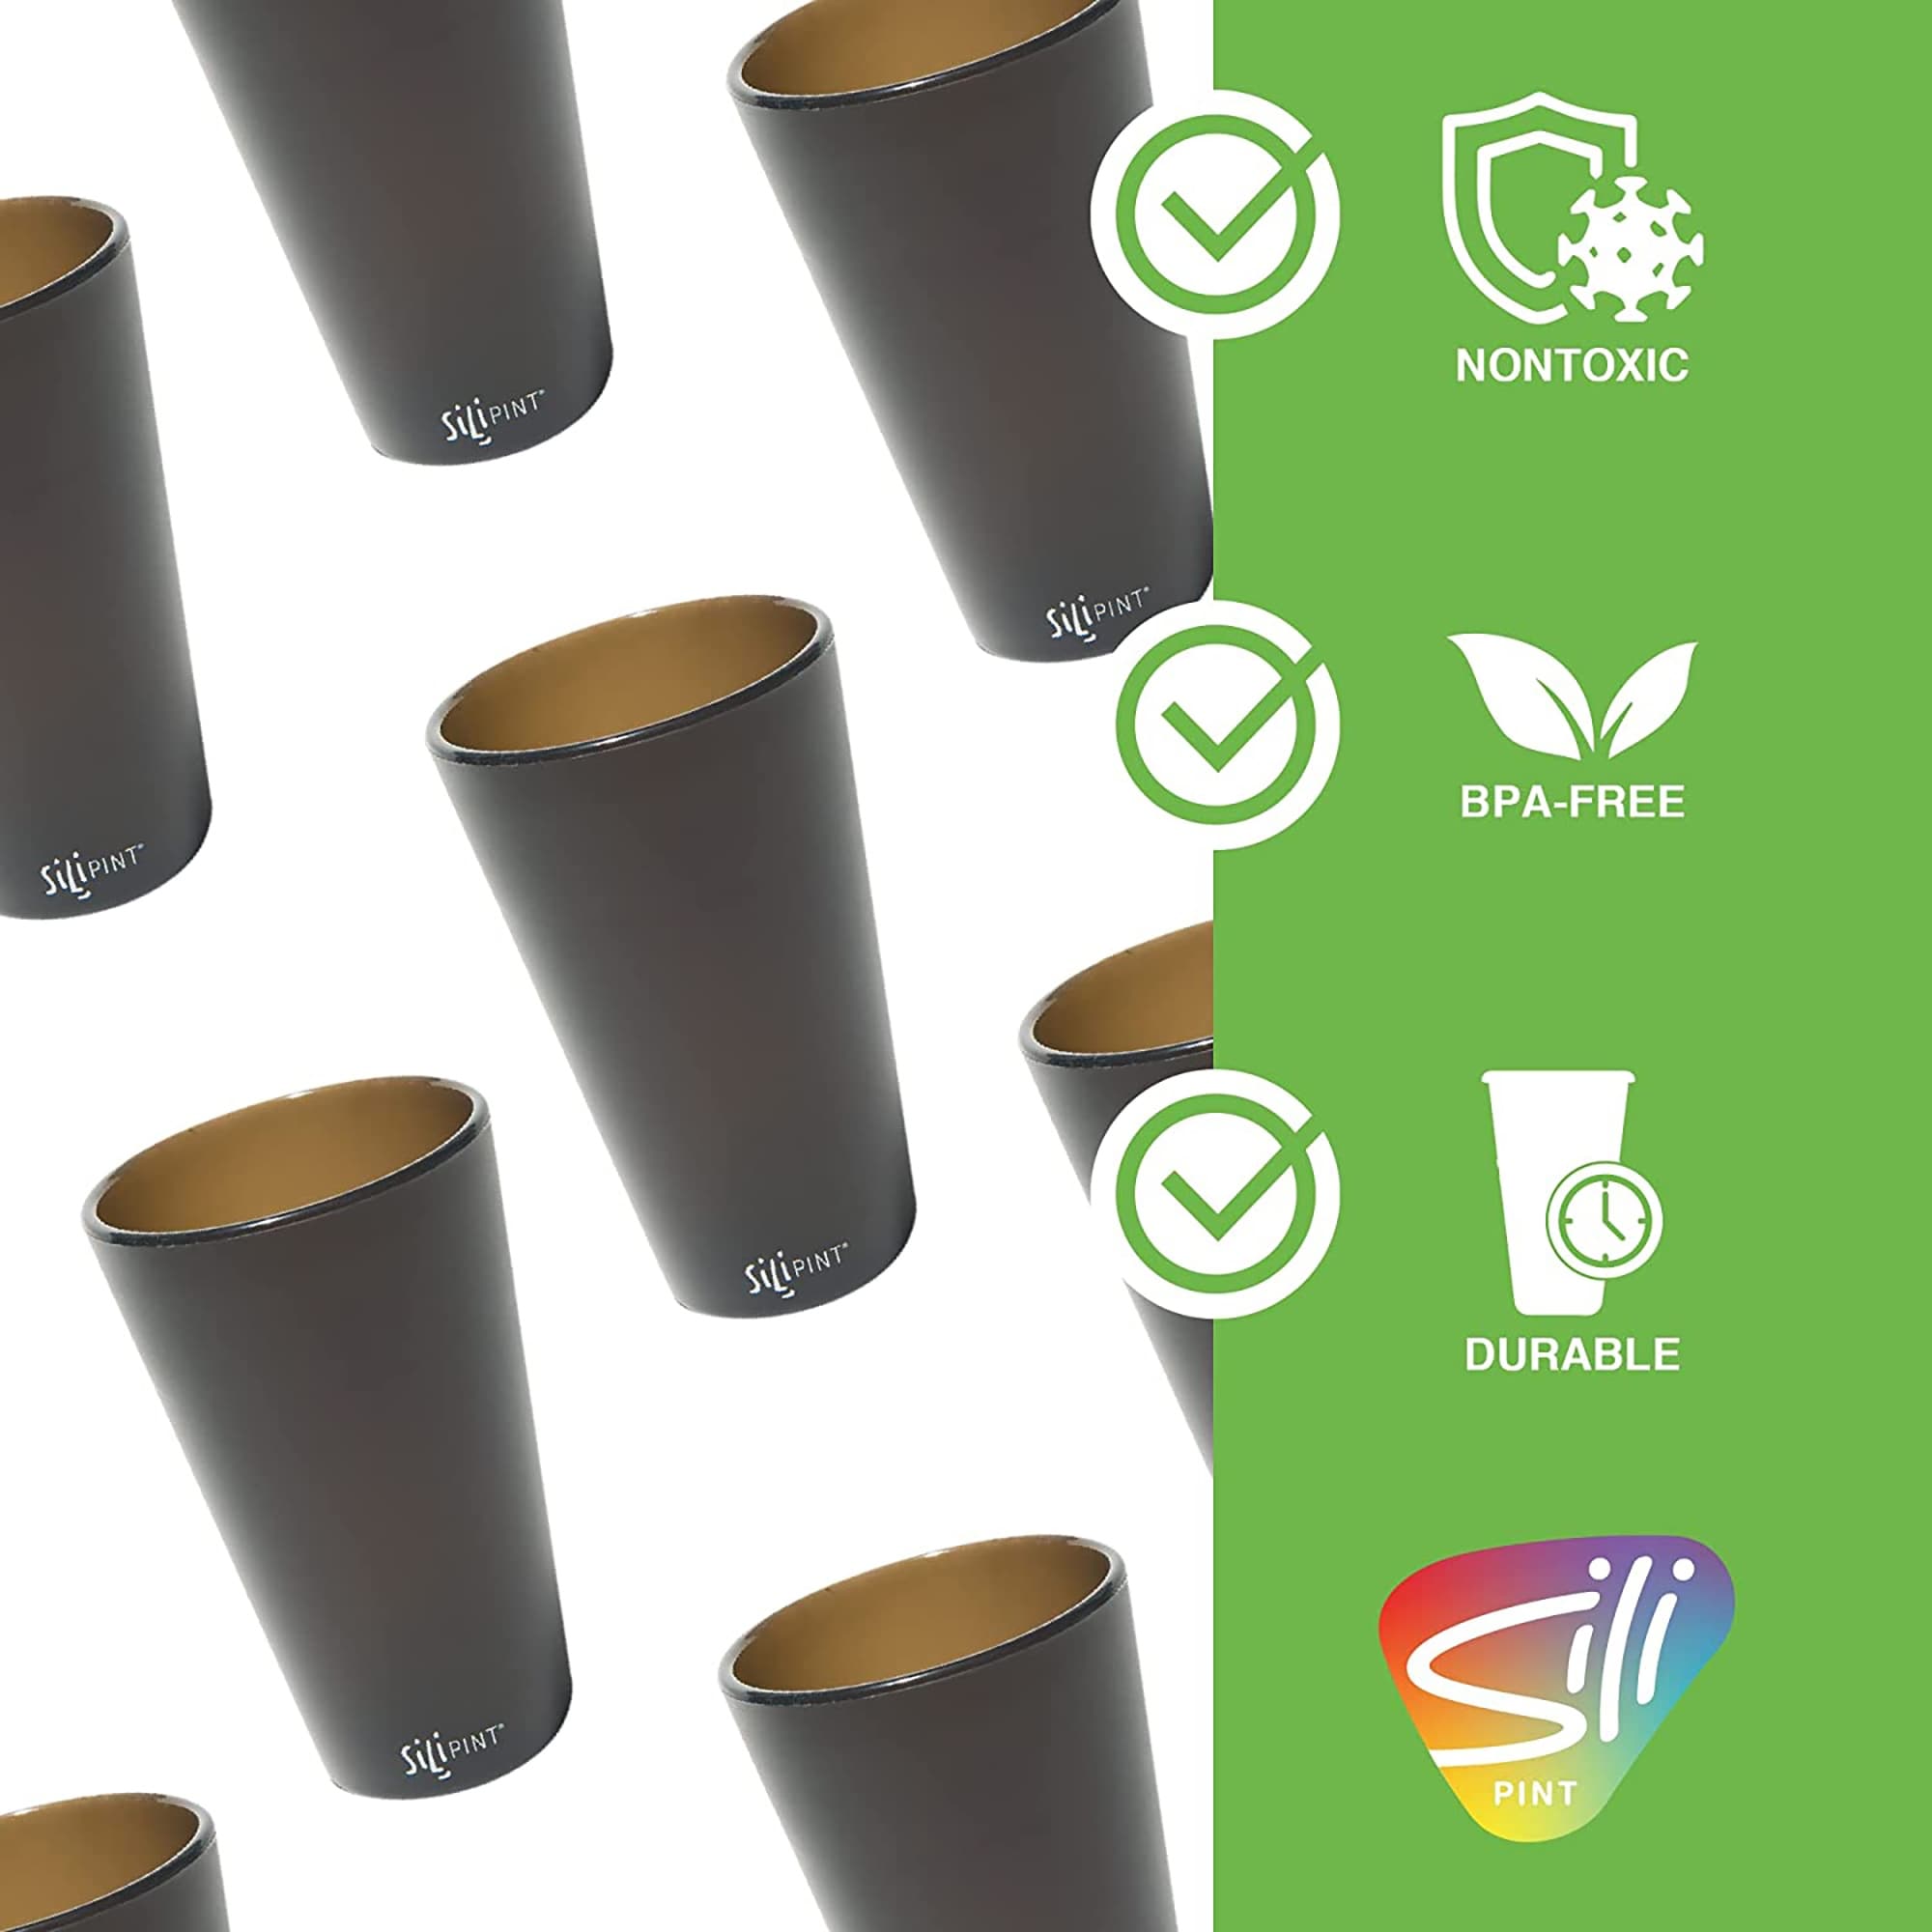 Silipint: Silicone 32oz Straw Tumblers: 2 Pack Sugar Rush - Reusable  Unbreakable Cup, Flexible, Hot/Cold, Airtight Lid